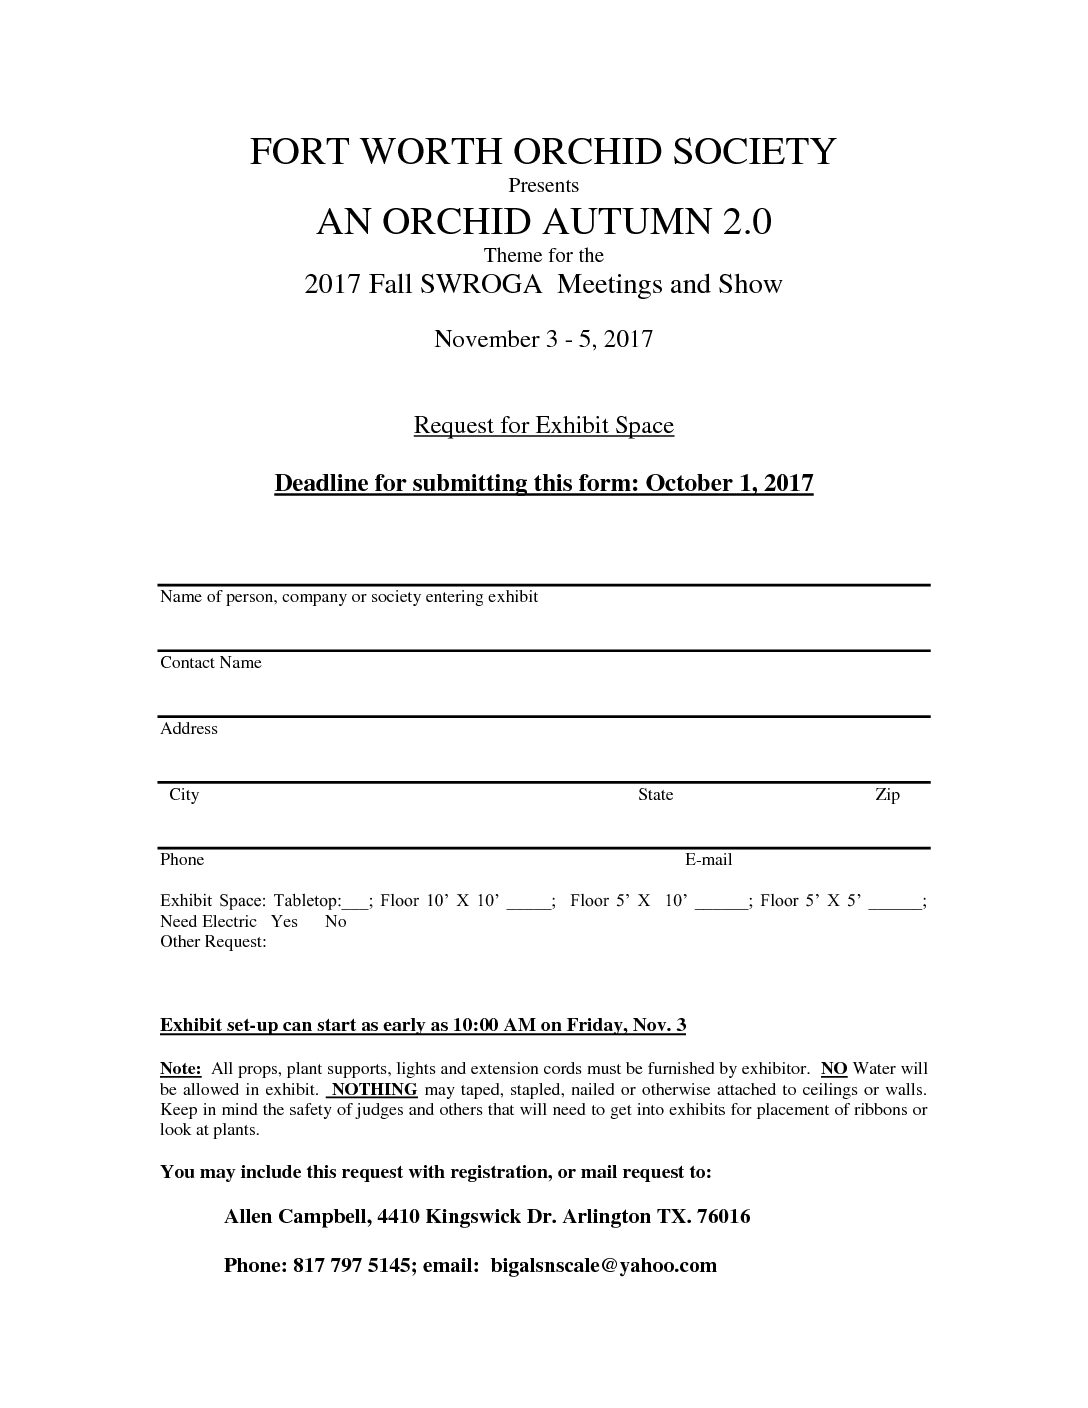 Acadian Orchid Society Short Course